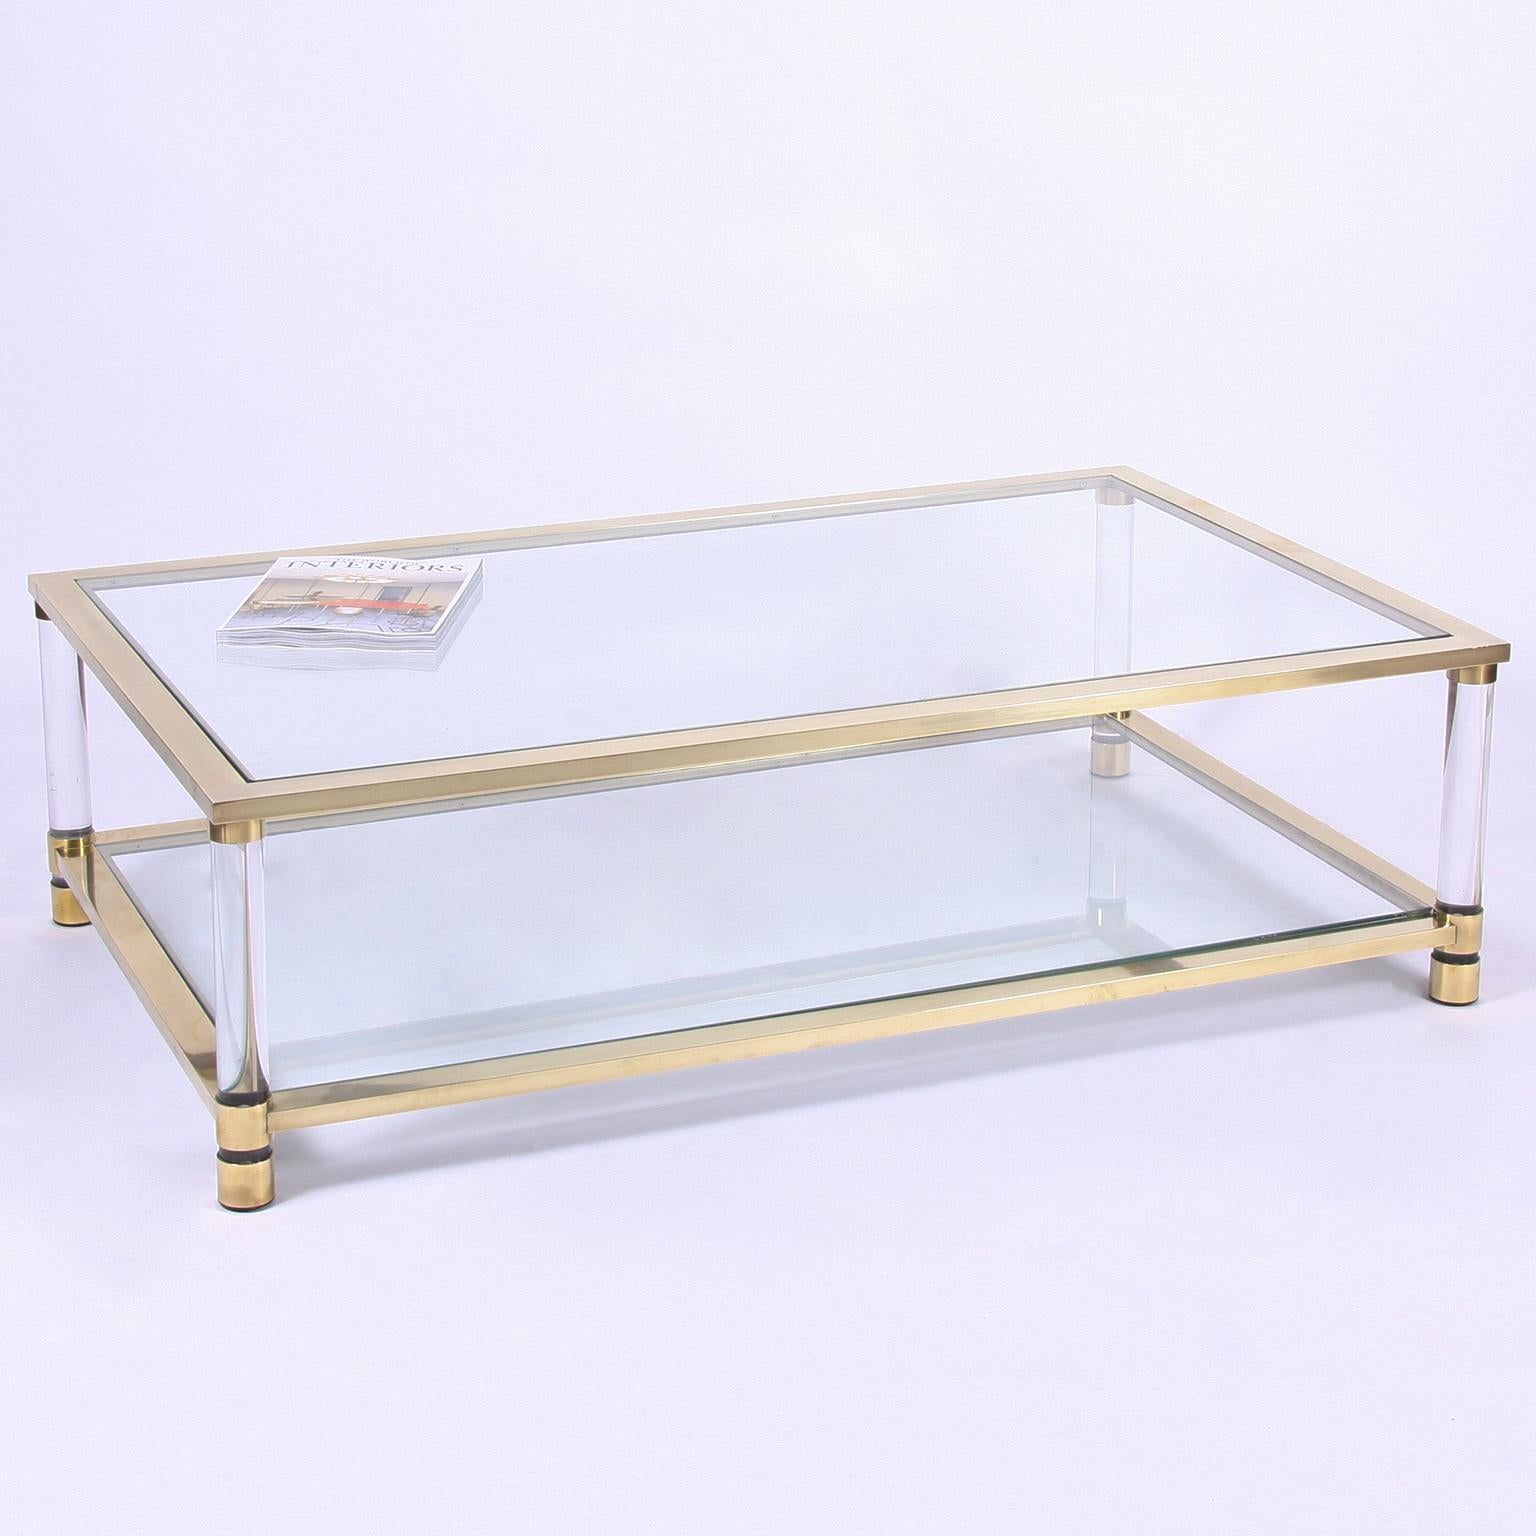 French, circa 1970

A chic, two-tier, large coffee table. This stunning, glass and brass model, also has Lucite legs.